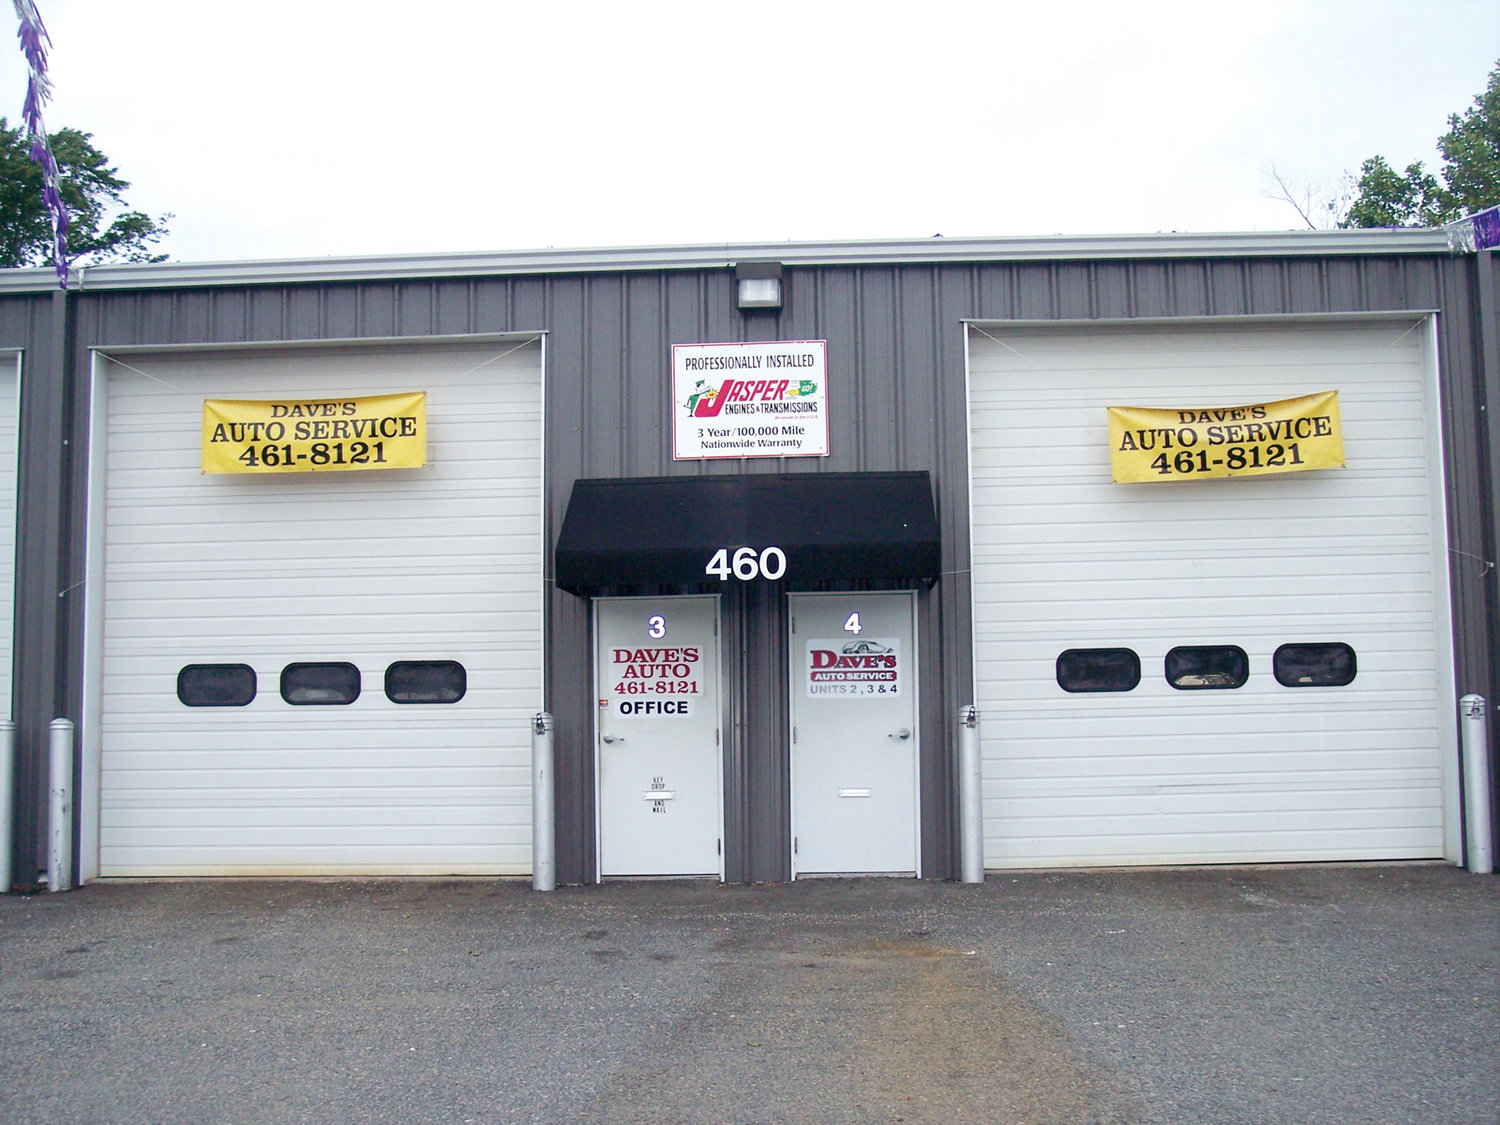 For those motorists who regularly travel down Warwick Avenue, the repair shop of Dave Rickey will be a familiar sight.  Owned and operated by Dave for nearly forty years, Dave’s Auto Service is your “go-to” place for everything that relates to your automobile this winter ~ and all year round.